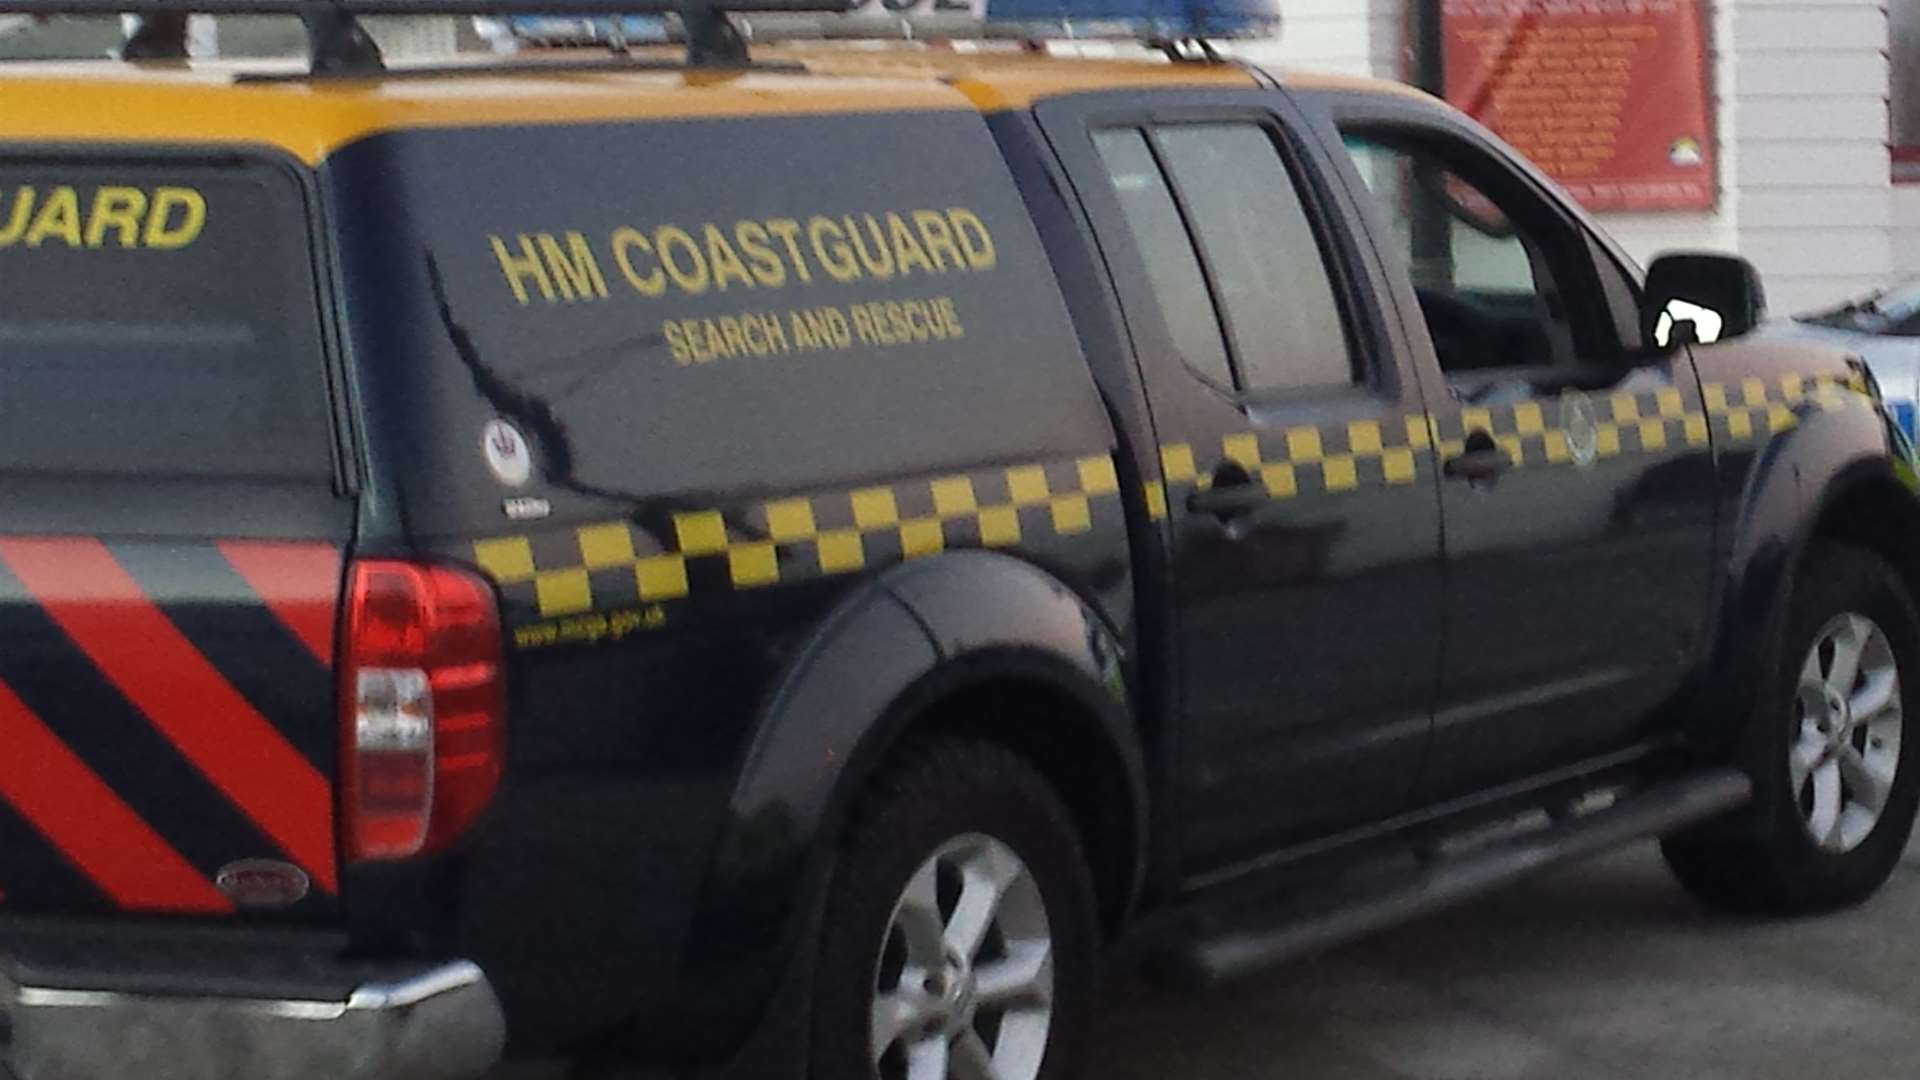 The coastguard and police were called to help find the missing person